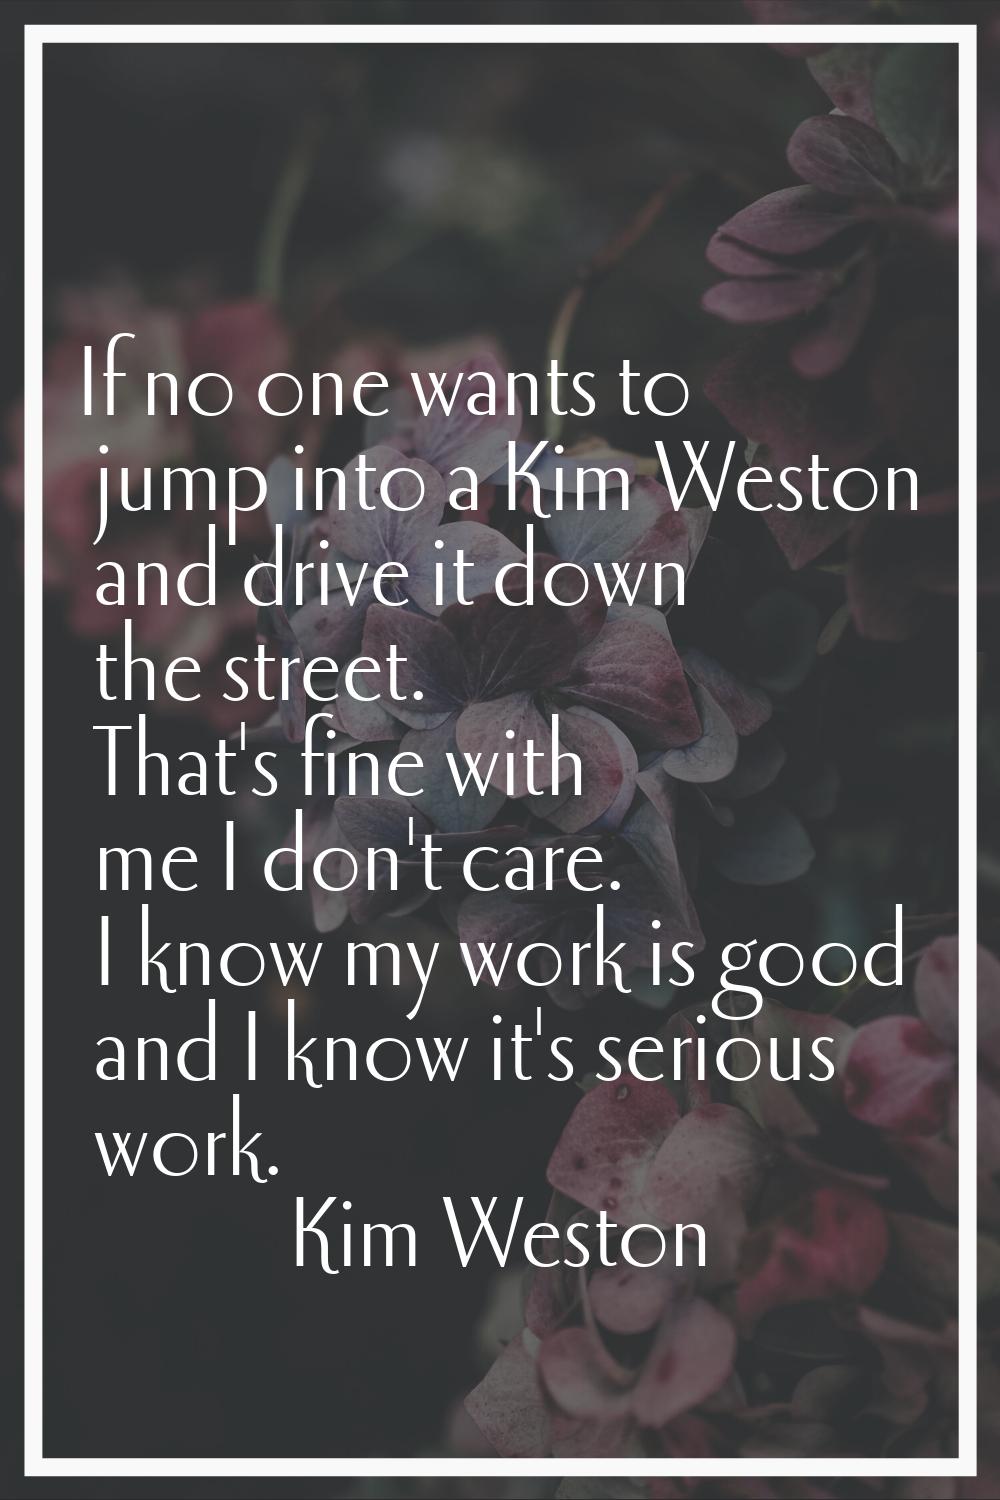 If no one wants to jump into a Kim Weston and drive it down the street. That's fine with me I don't